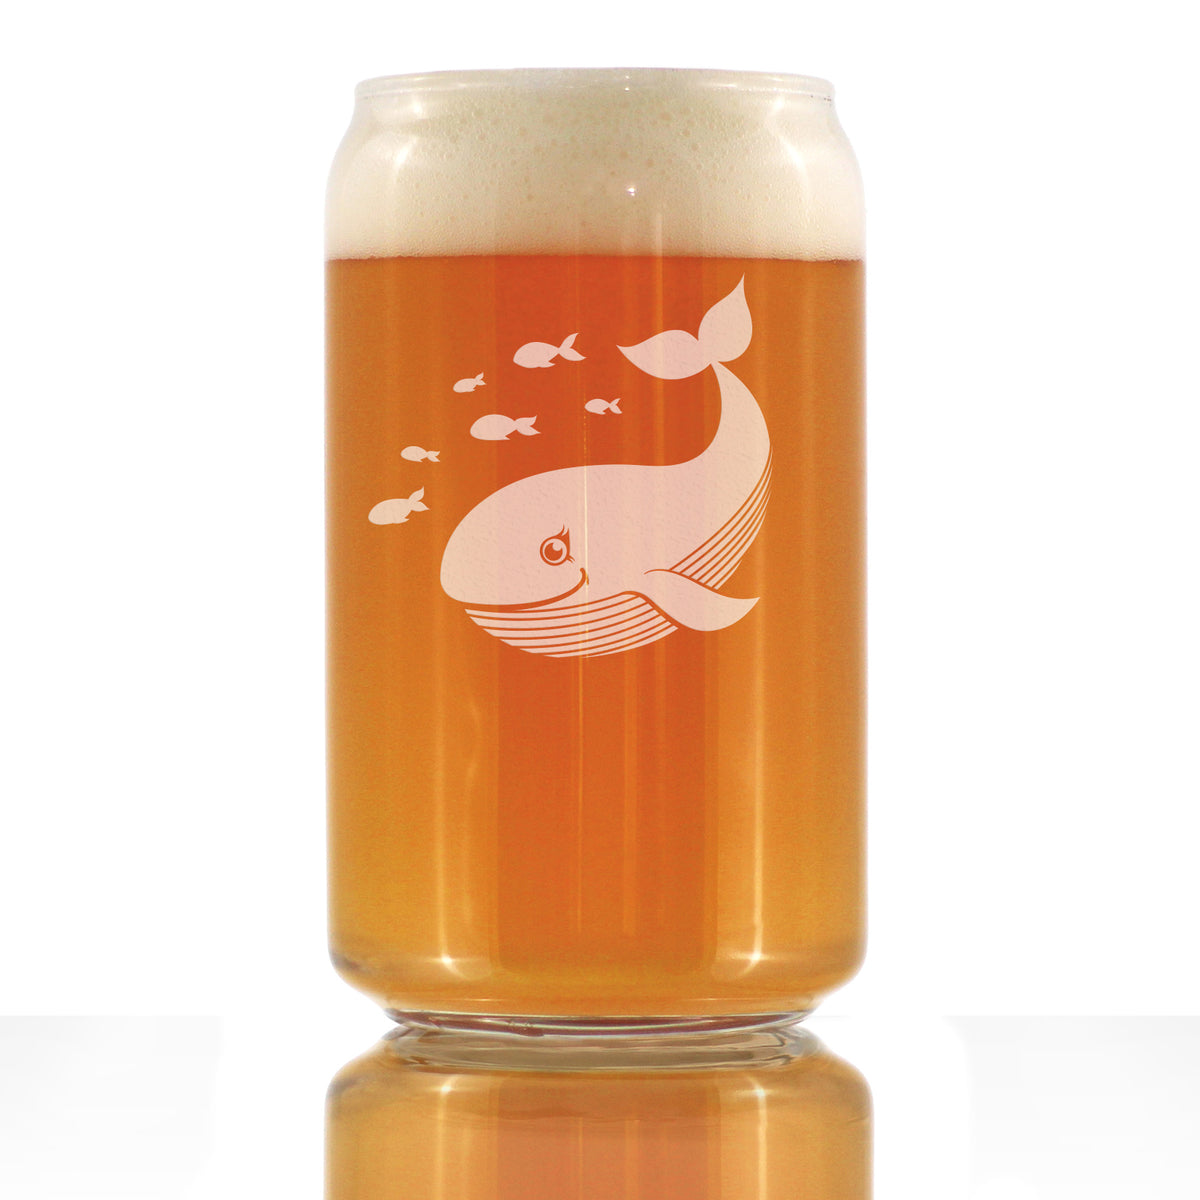 Cute Whale Beer Can Pint Glass - Beach Themed Decor and Gifts for Whale Lovers - 16 Oz Glasses